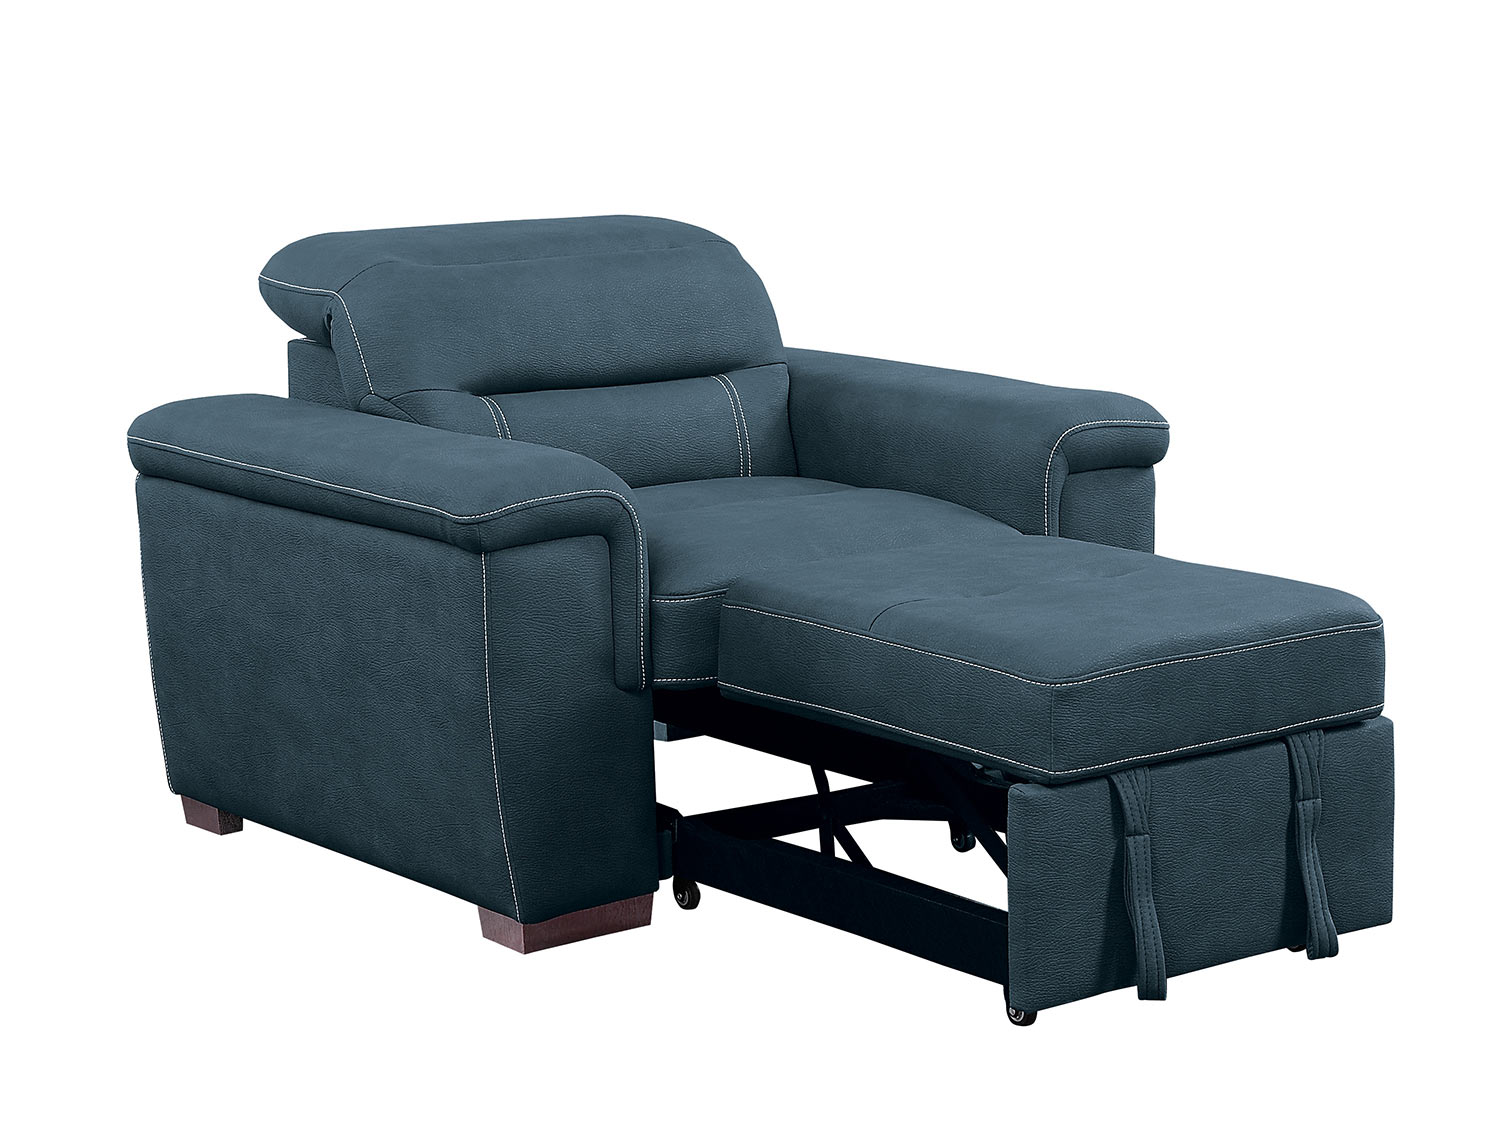 Homelegance Alfio Chair with Pull-out Ottoman - Blue